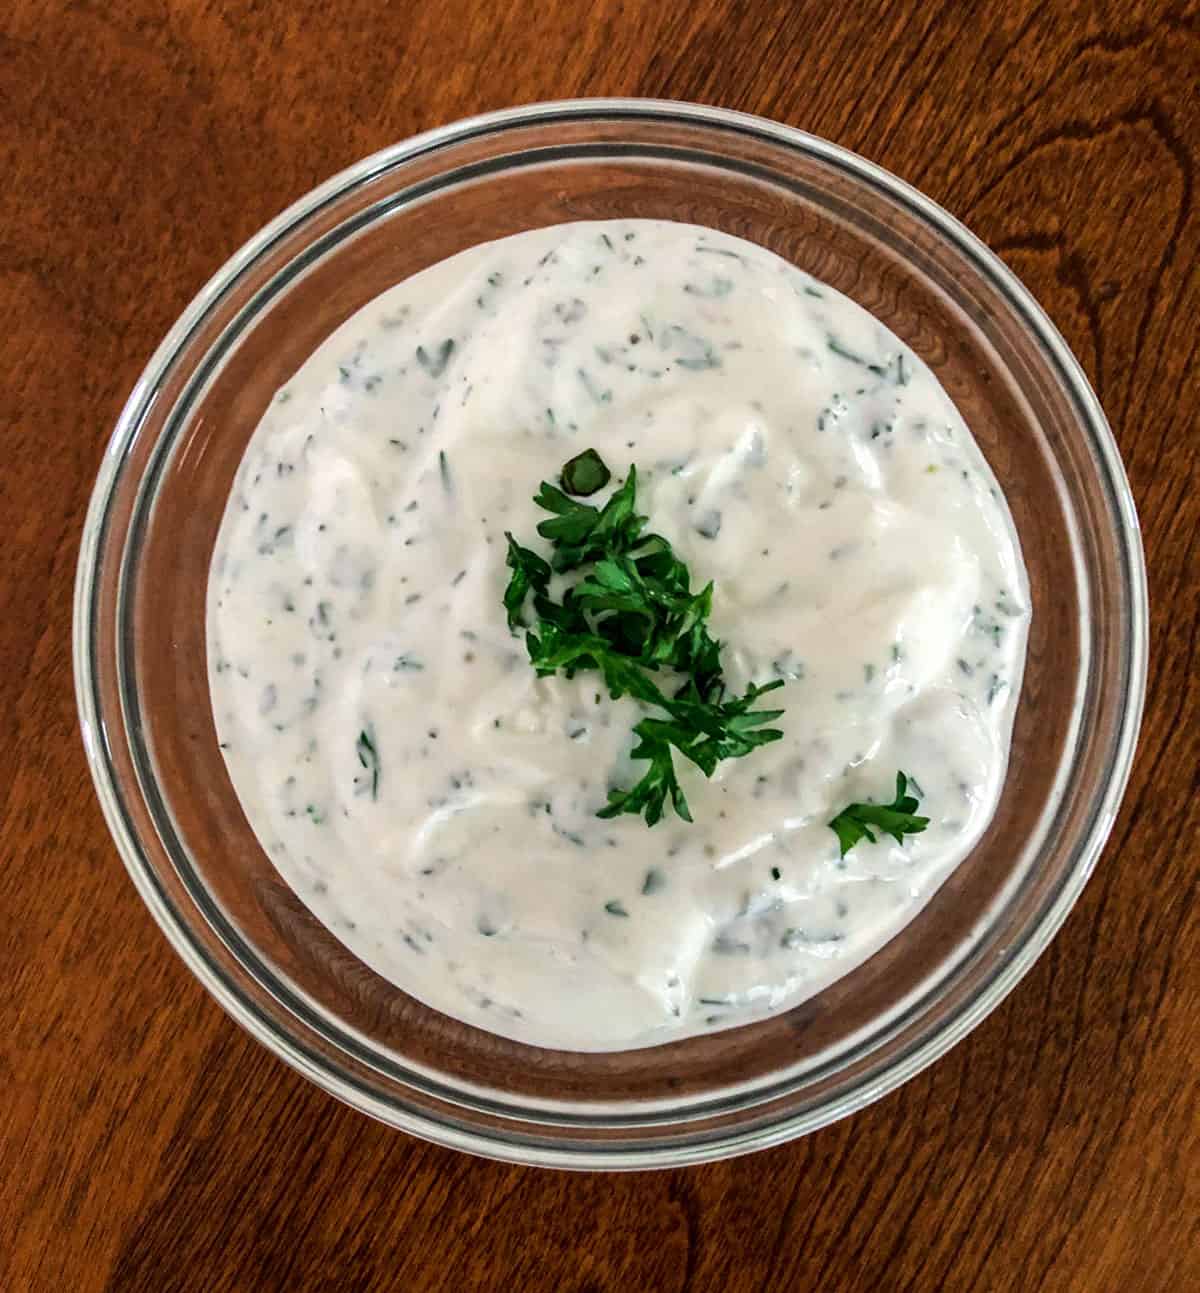 Herb dip in a glass bowl.